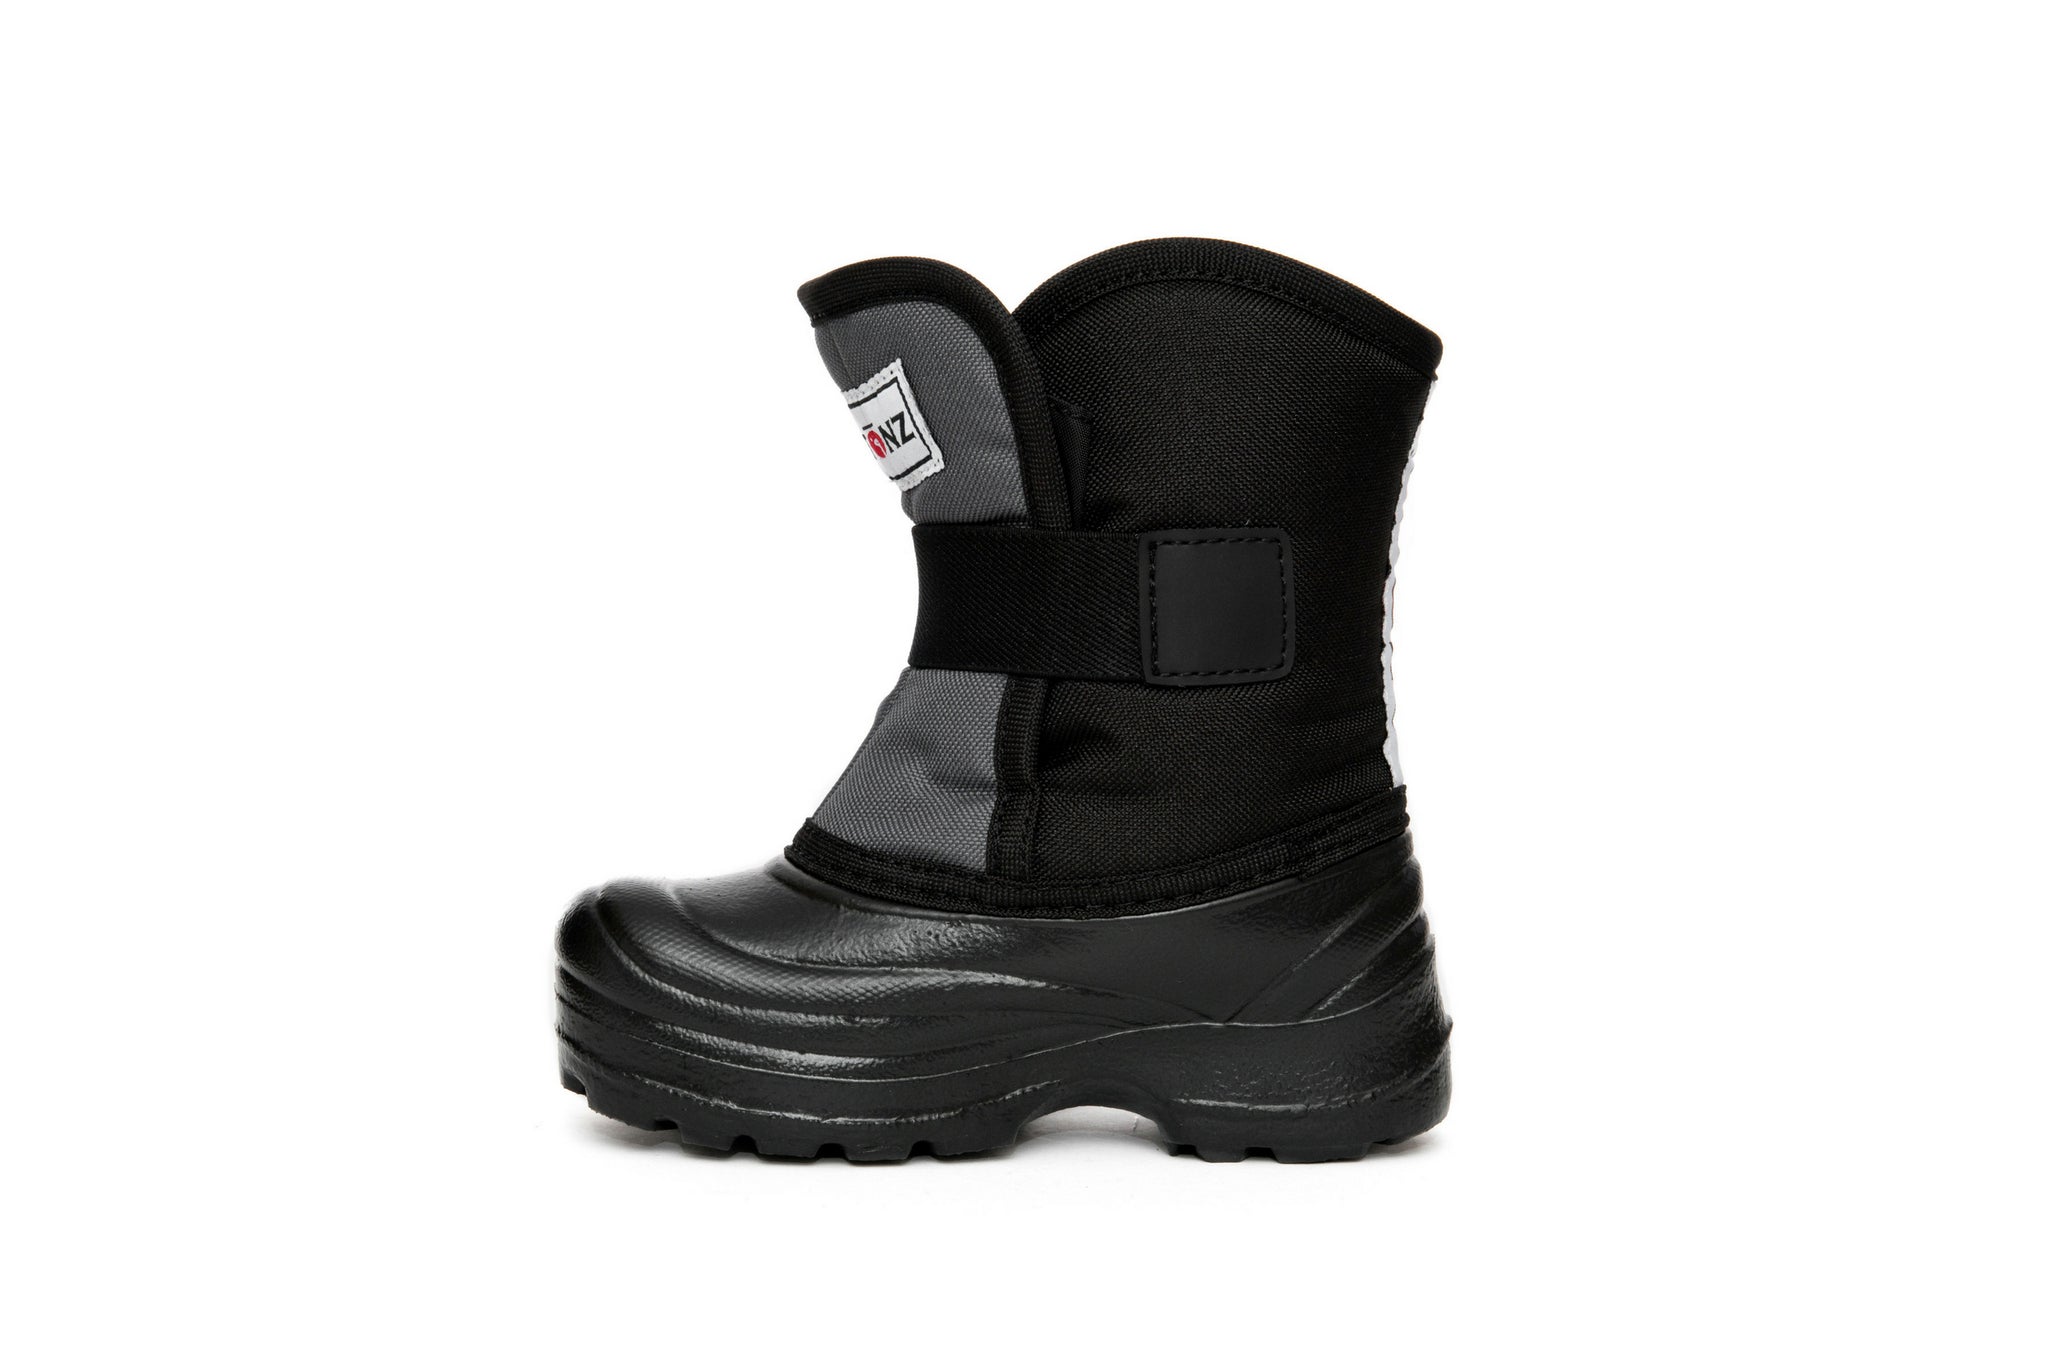 | for Weather-resistant Boots Reflective Scout Stonz Shoes Winter | Toddlers - - Grey/Black